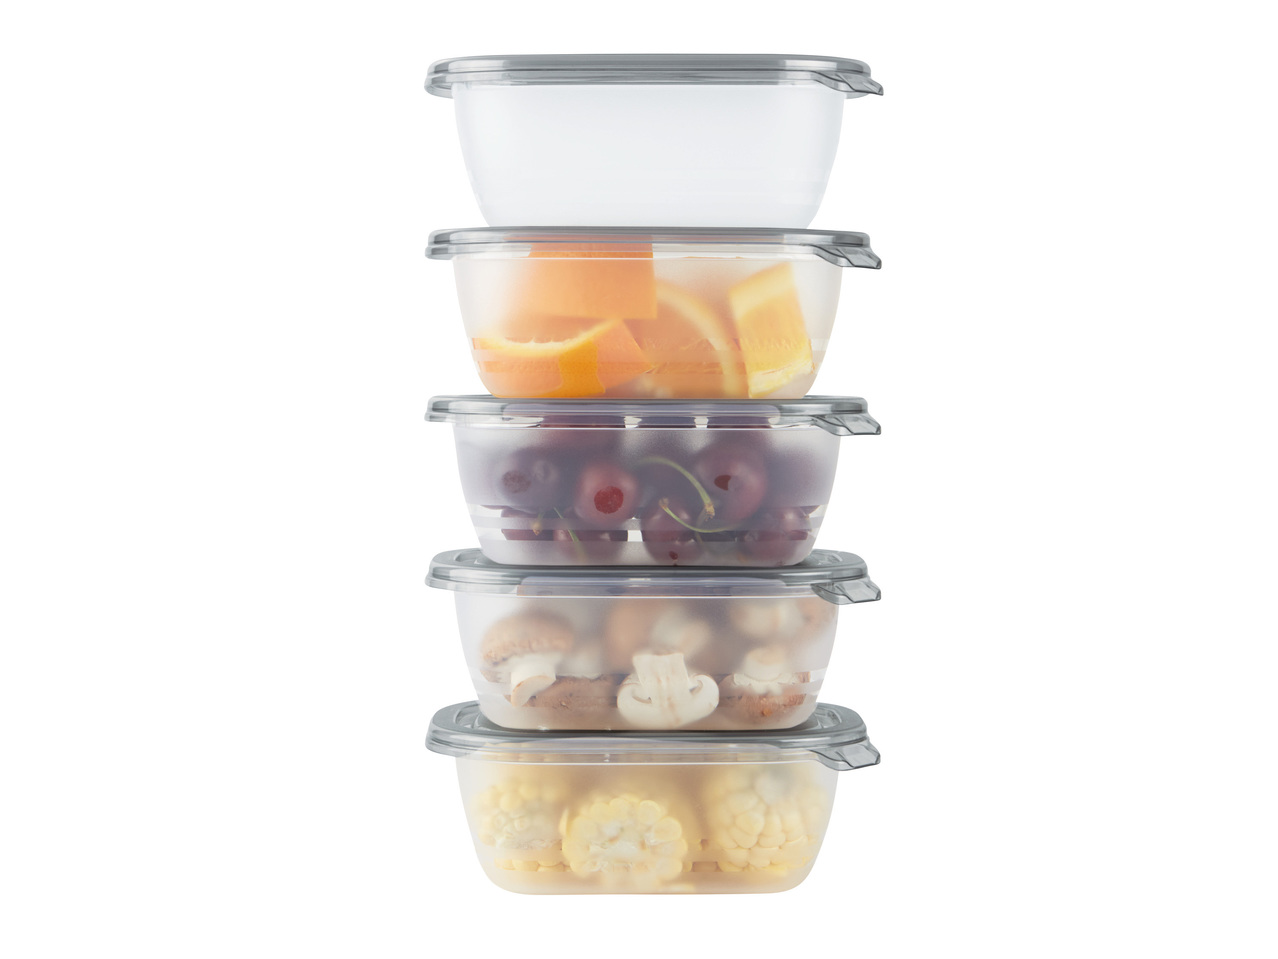 ERNESTO Food Storage Containers